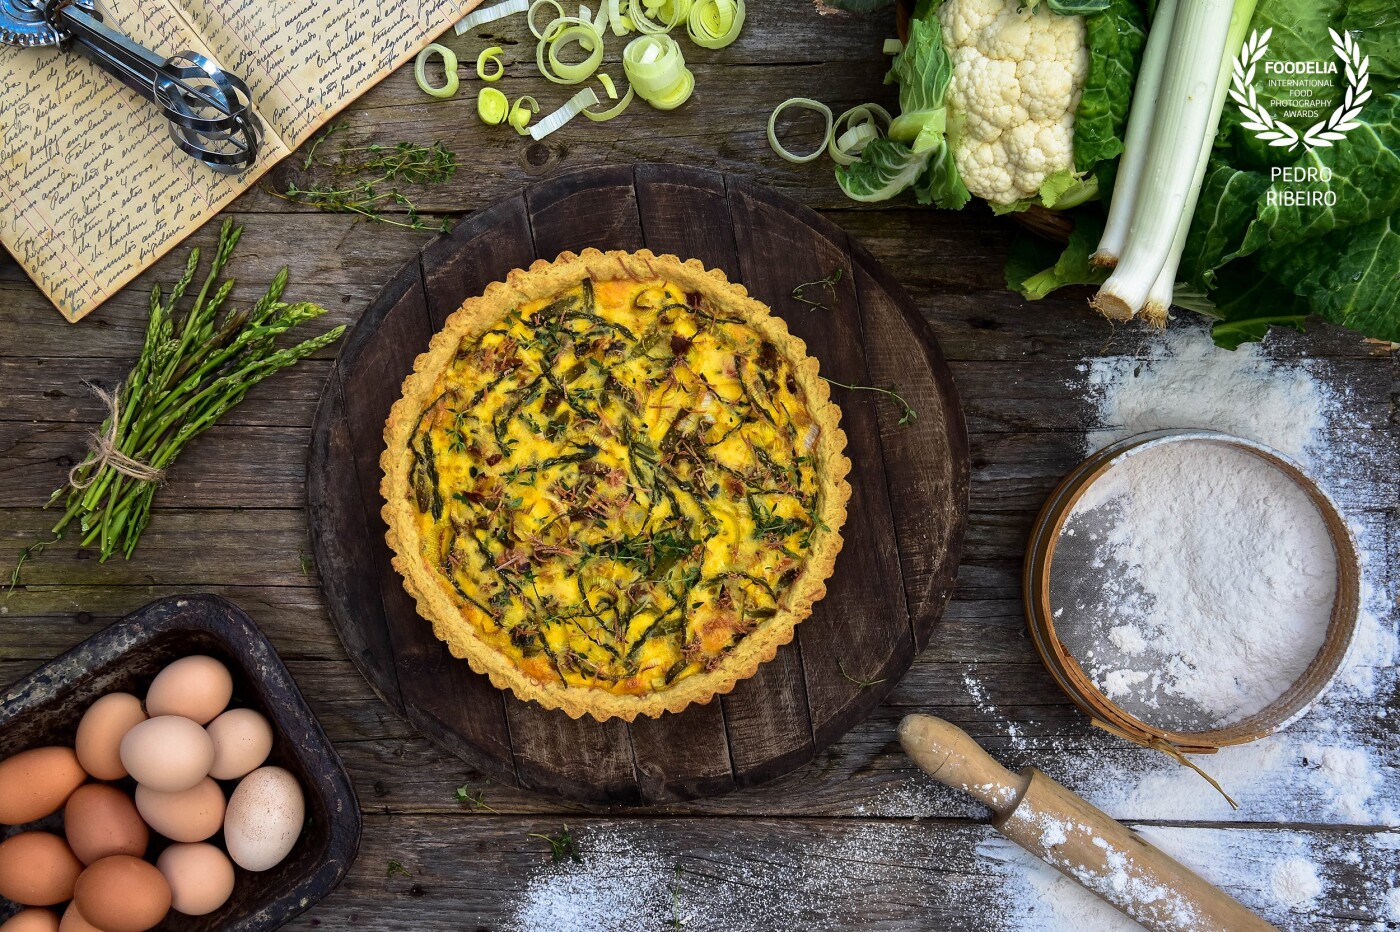 This vegetarian pie  was for a promotional photo shooting for a Take Away bakery called "Sal e Limão" located in Porto, Portugal.